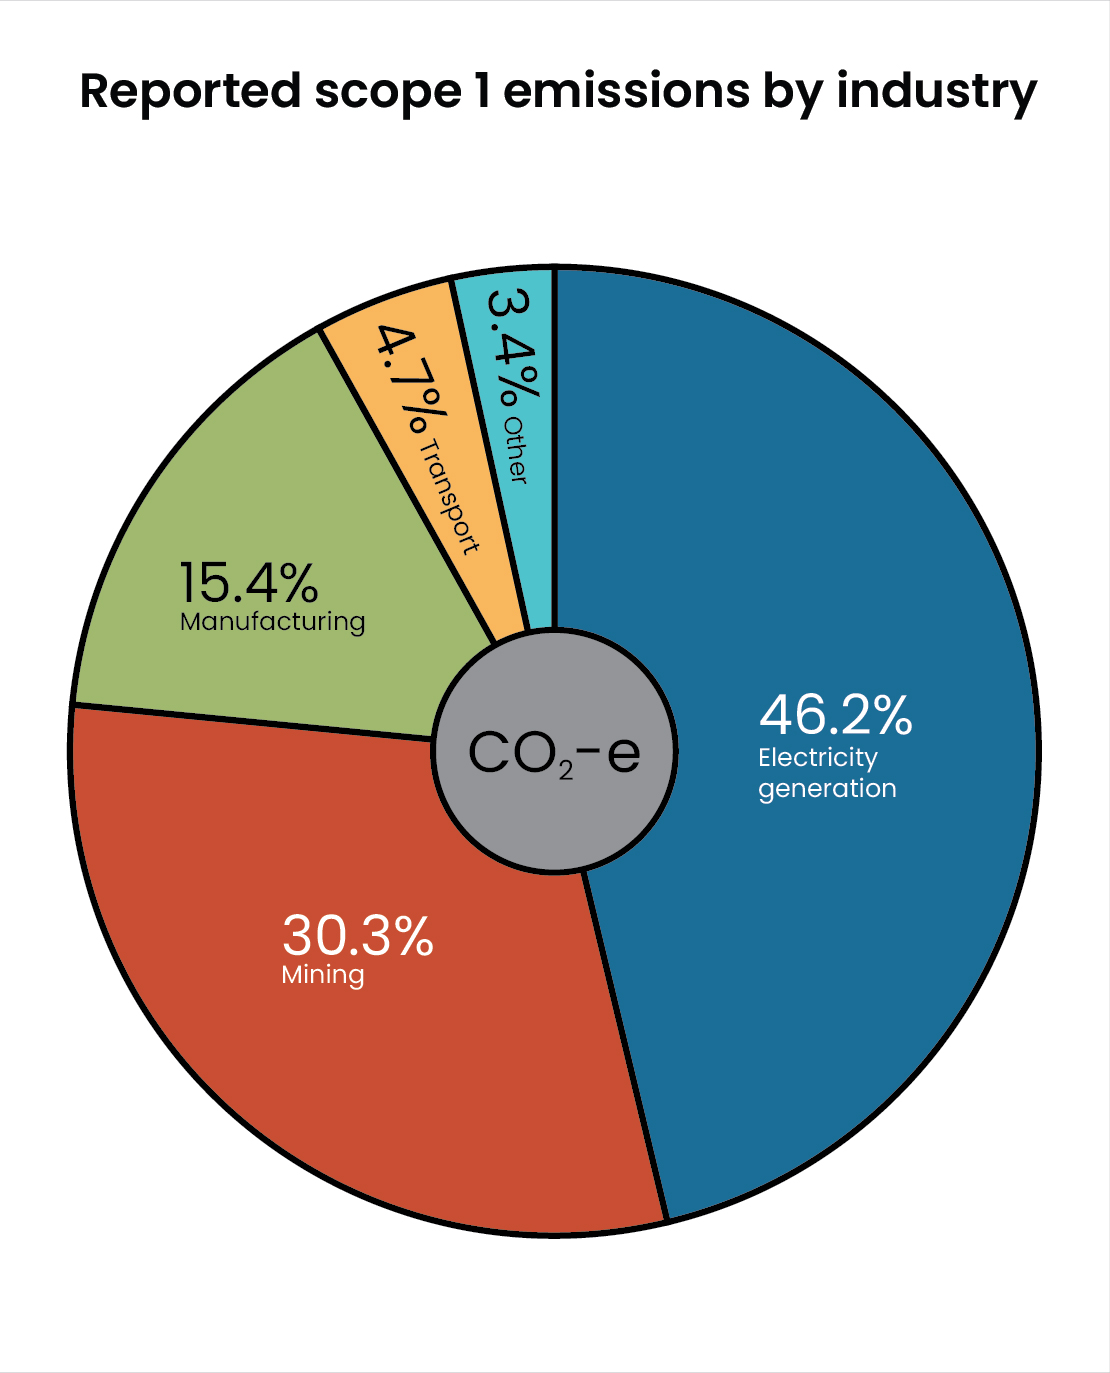 A pie chart showing the percentages of reported scope 1 emissions by industry